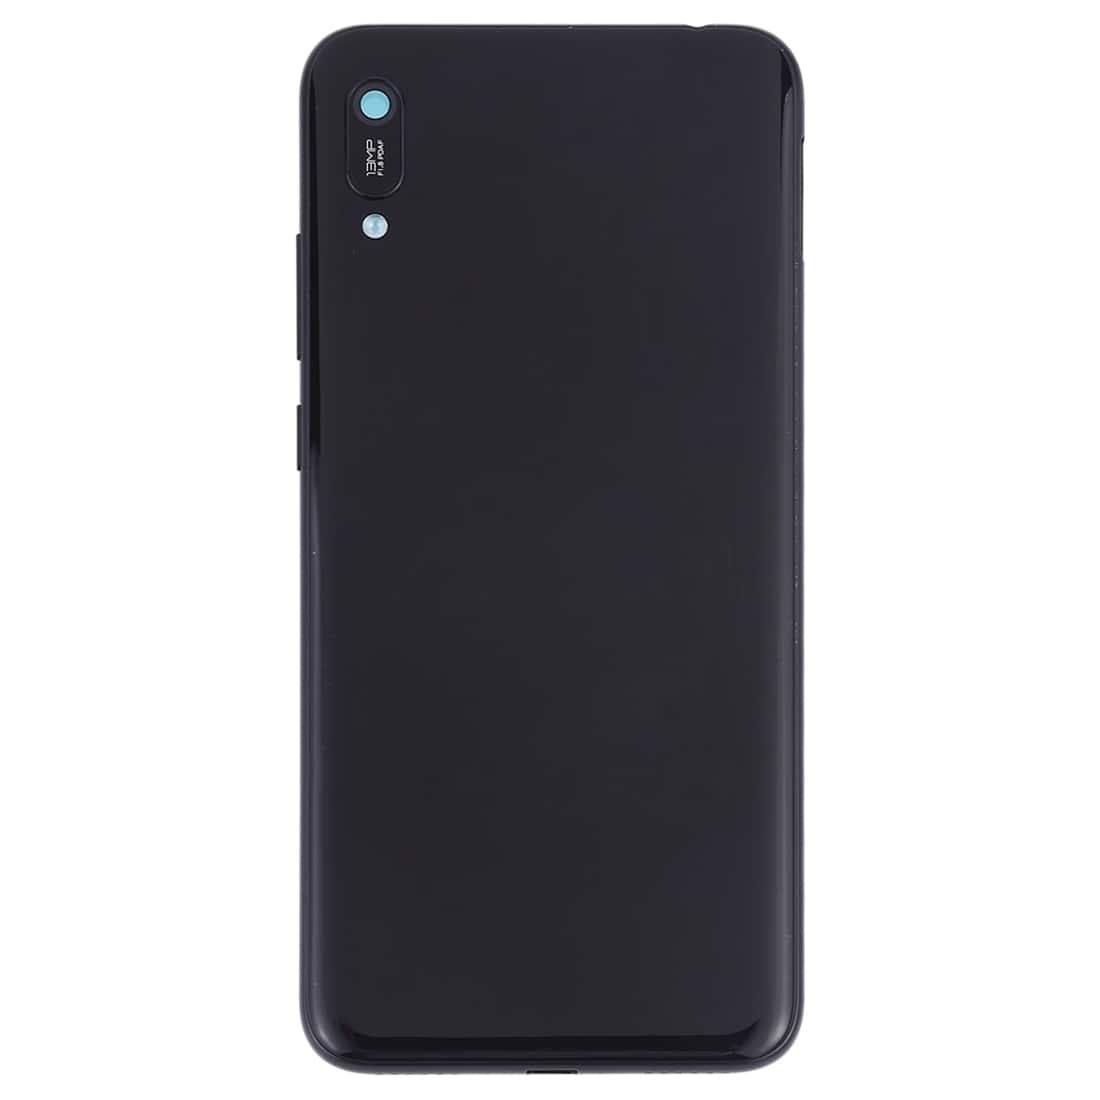 Back Panel Housing Body for Huawei Y6 2019 Black with Camera Lens